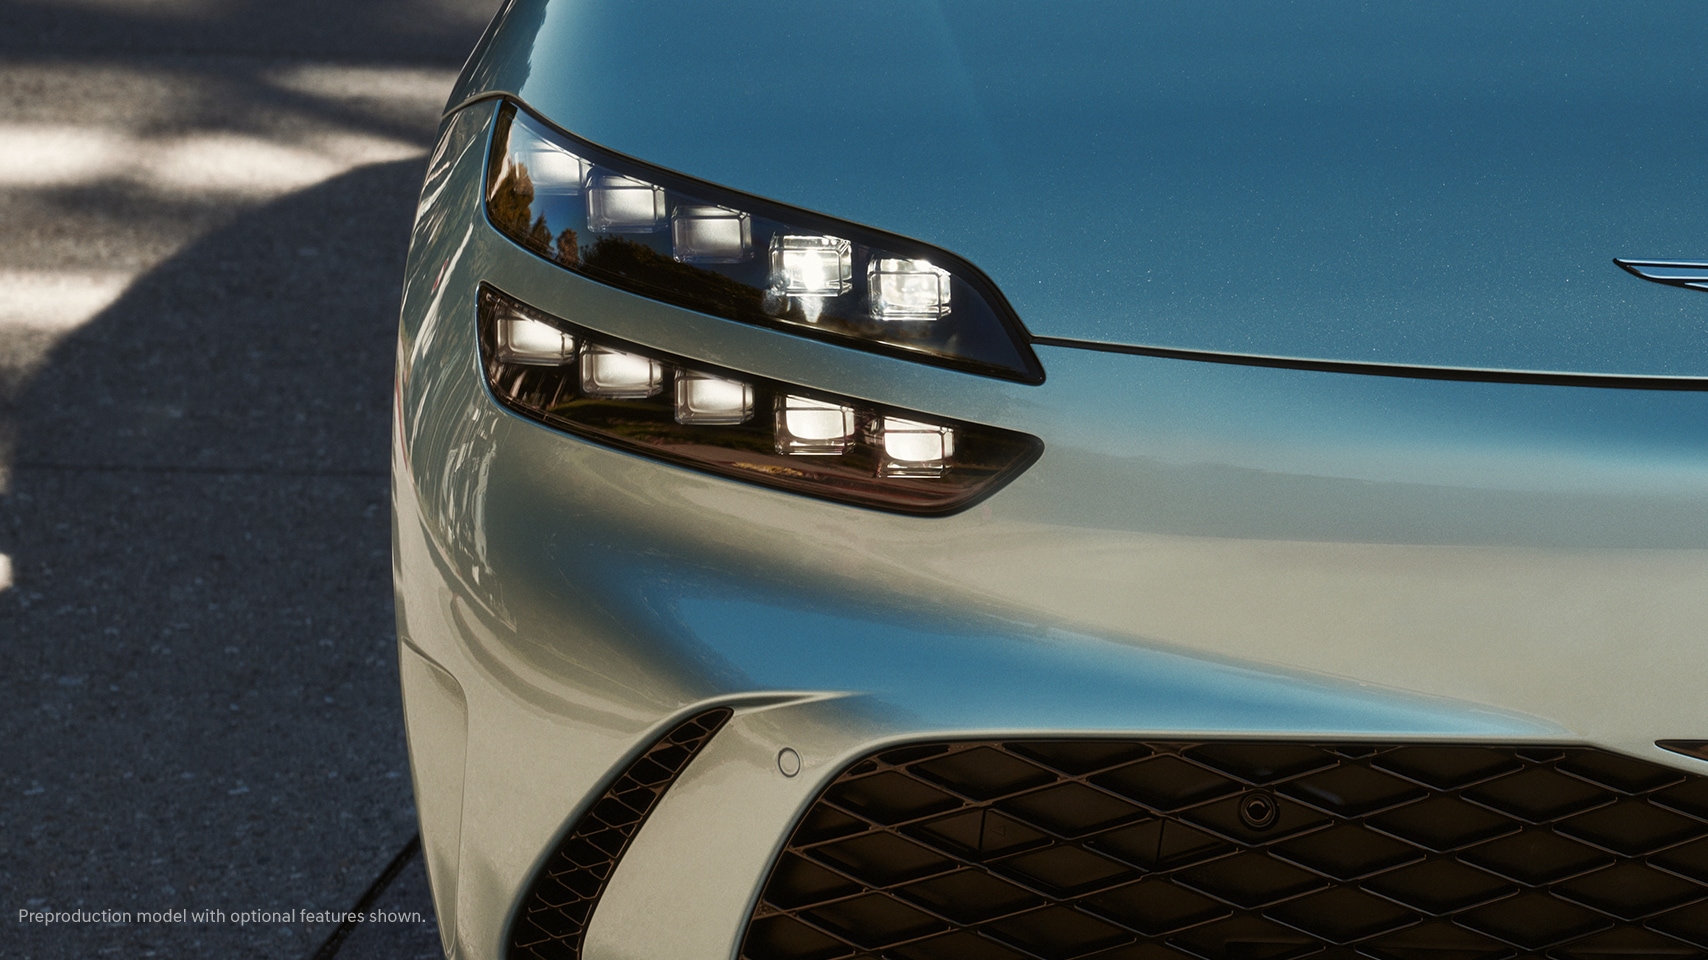 2023 Genesis GV60 shown with illuminated Two Lines headlamps.